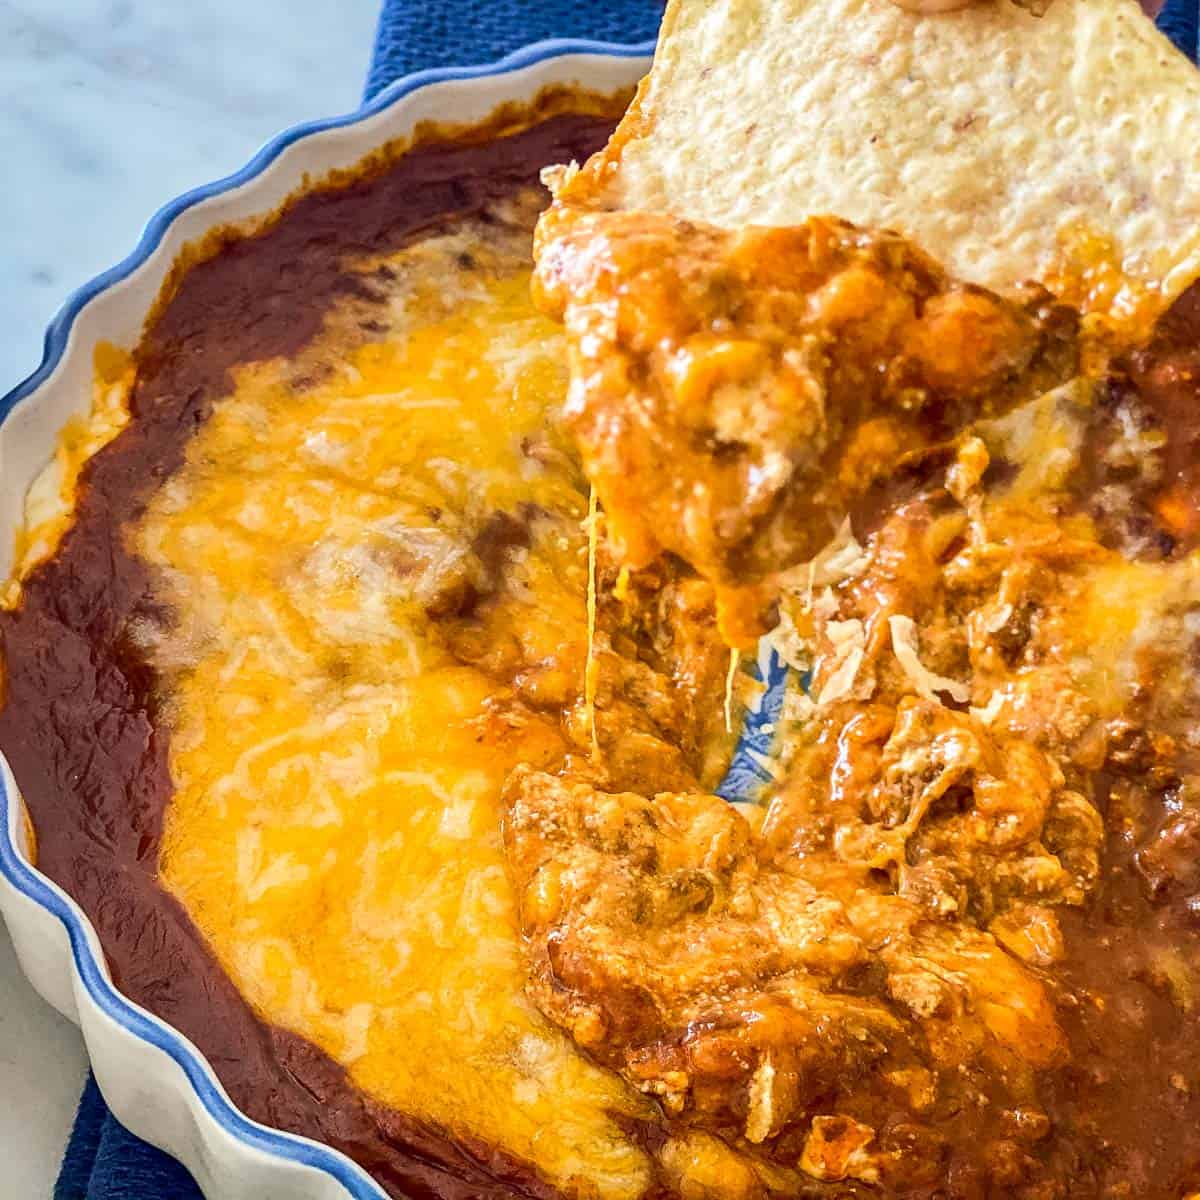 Image showing chili cheese dip with chip.